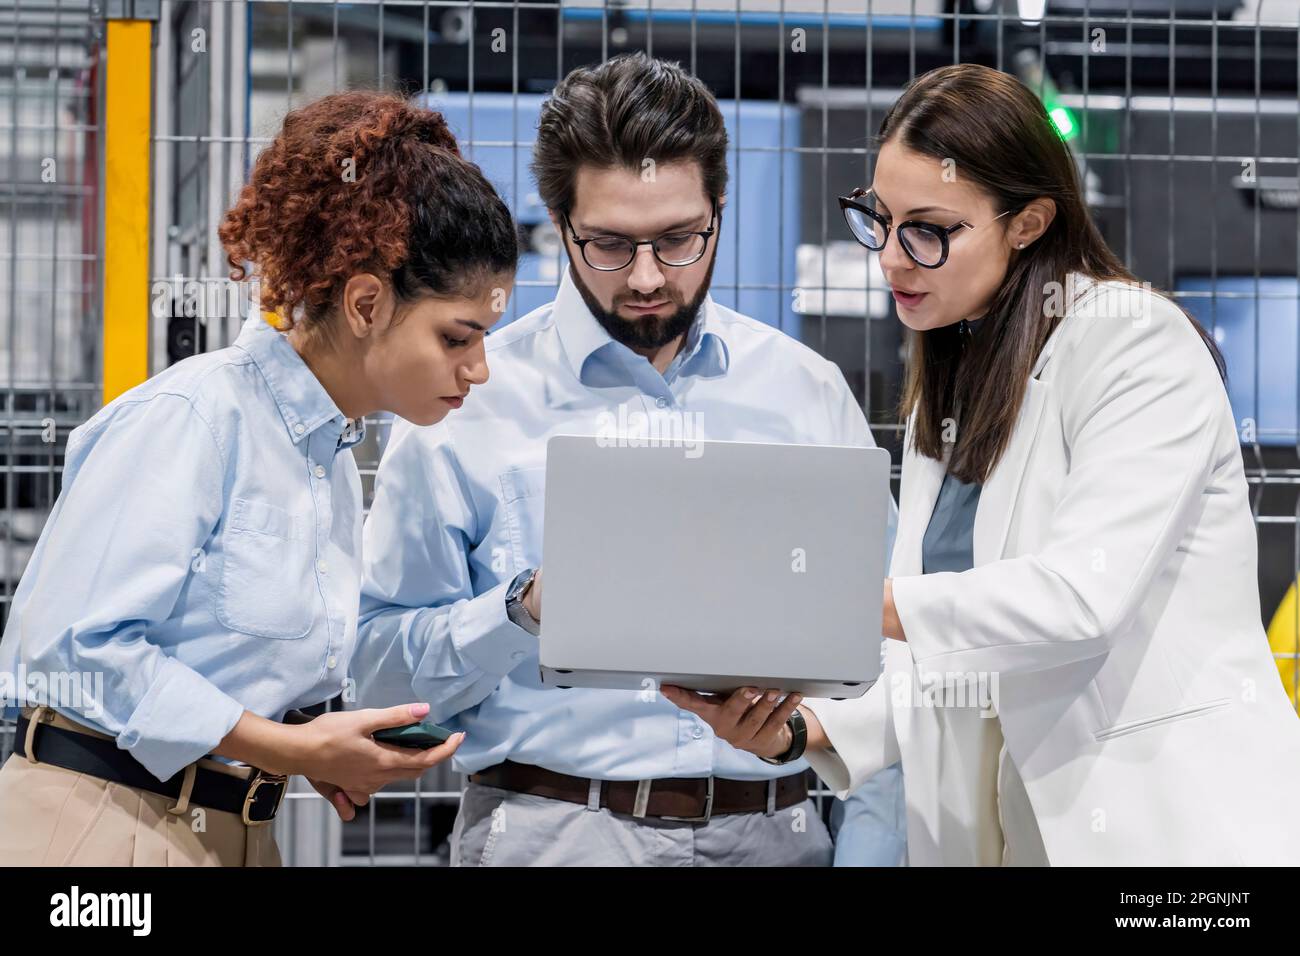 Businesswoman sharing laptop with colleagues in factory Stock Photo